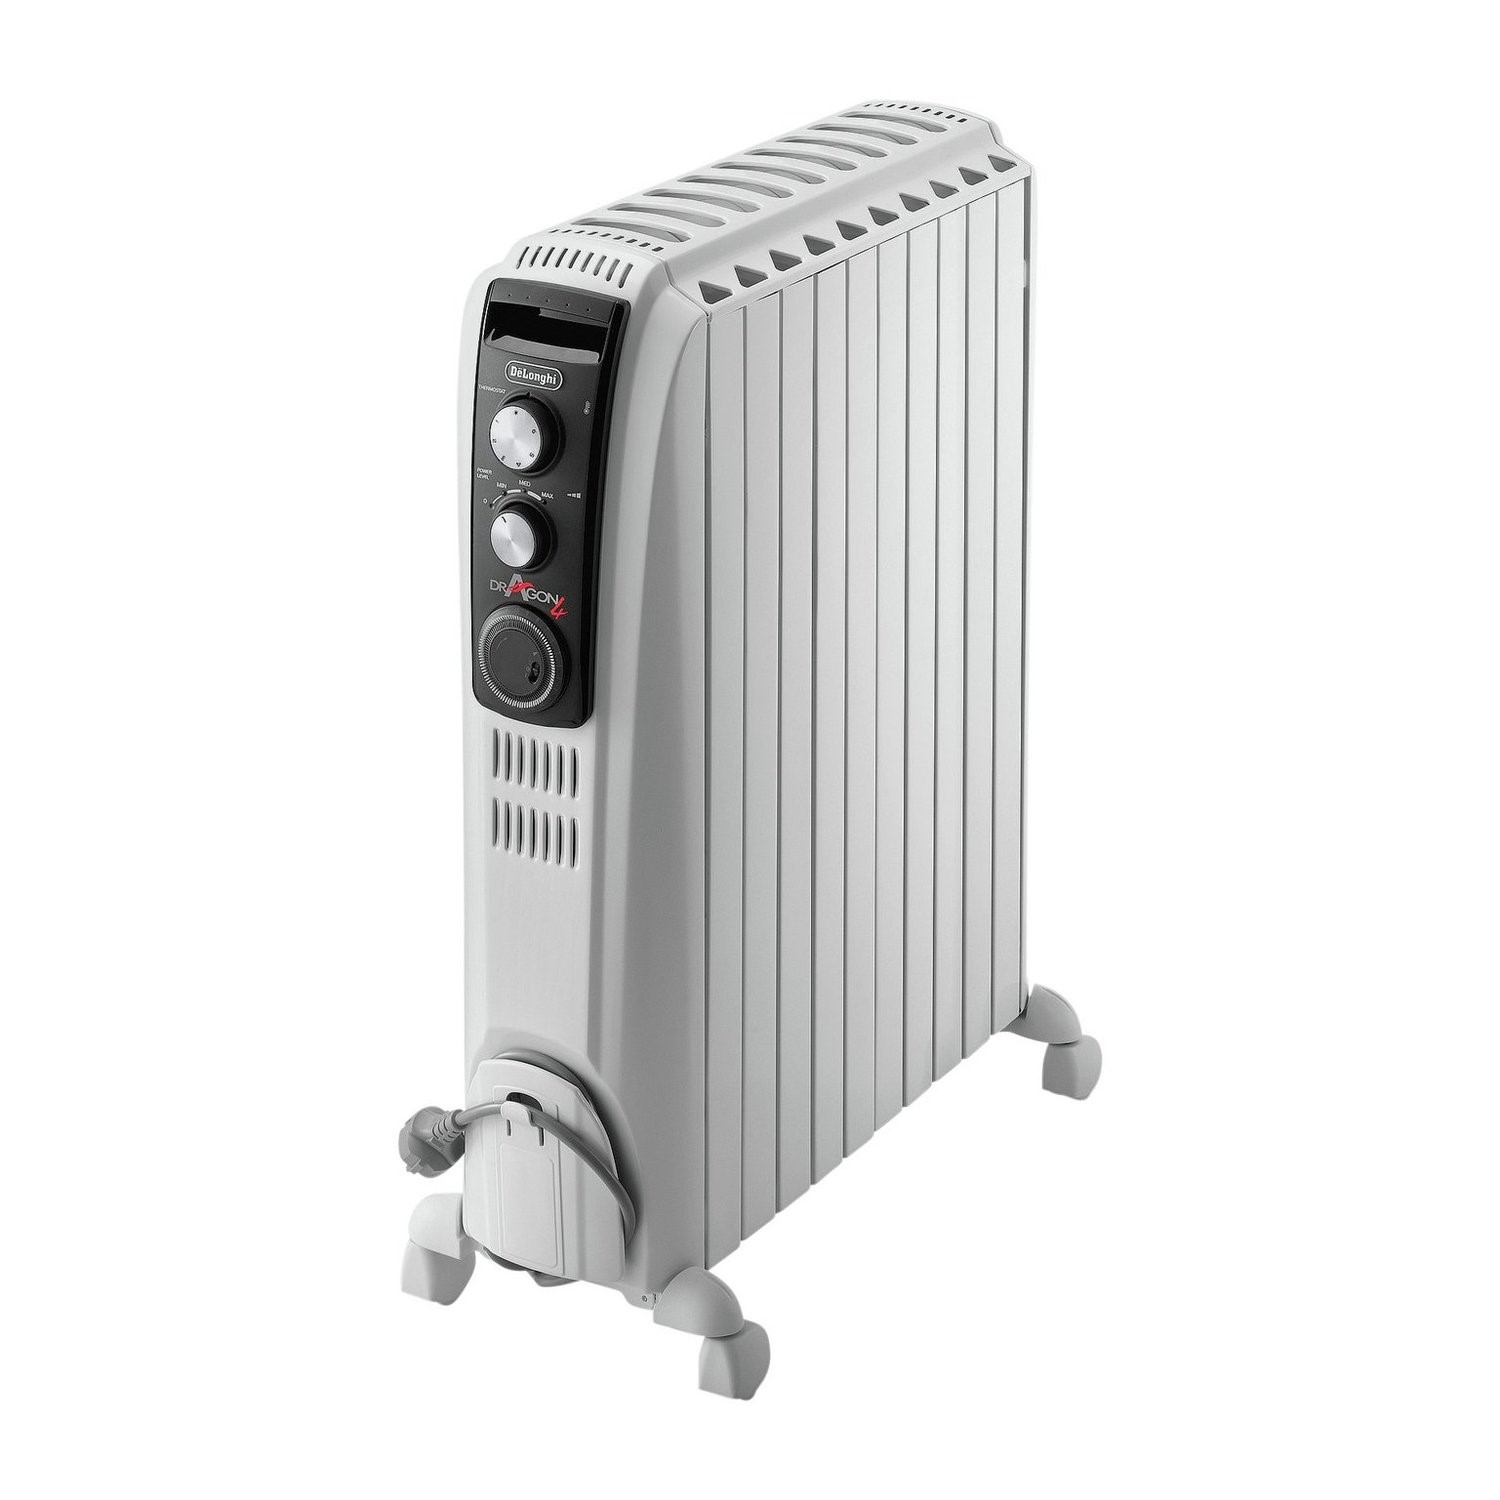 DeLonghi Dragon 4 2kW Oil Filled Radiator with 10 years warranty - TRD408020T